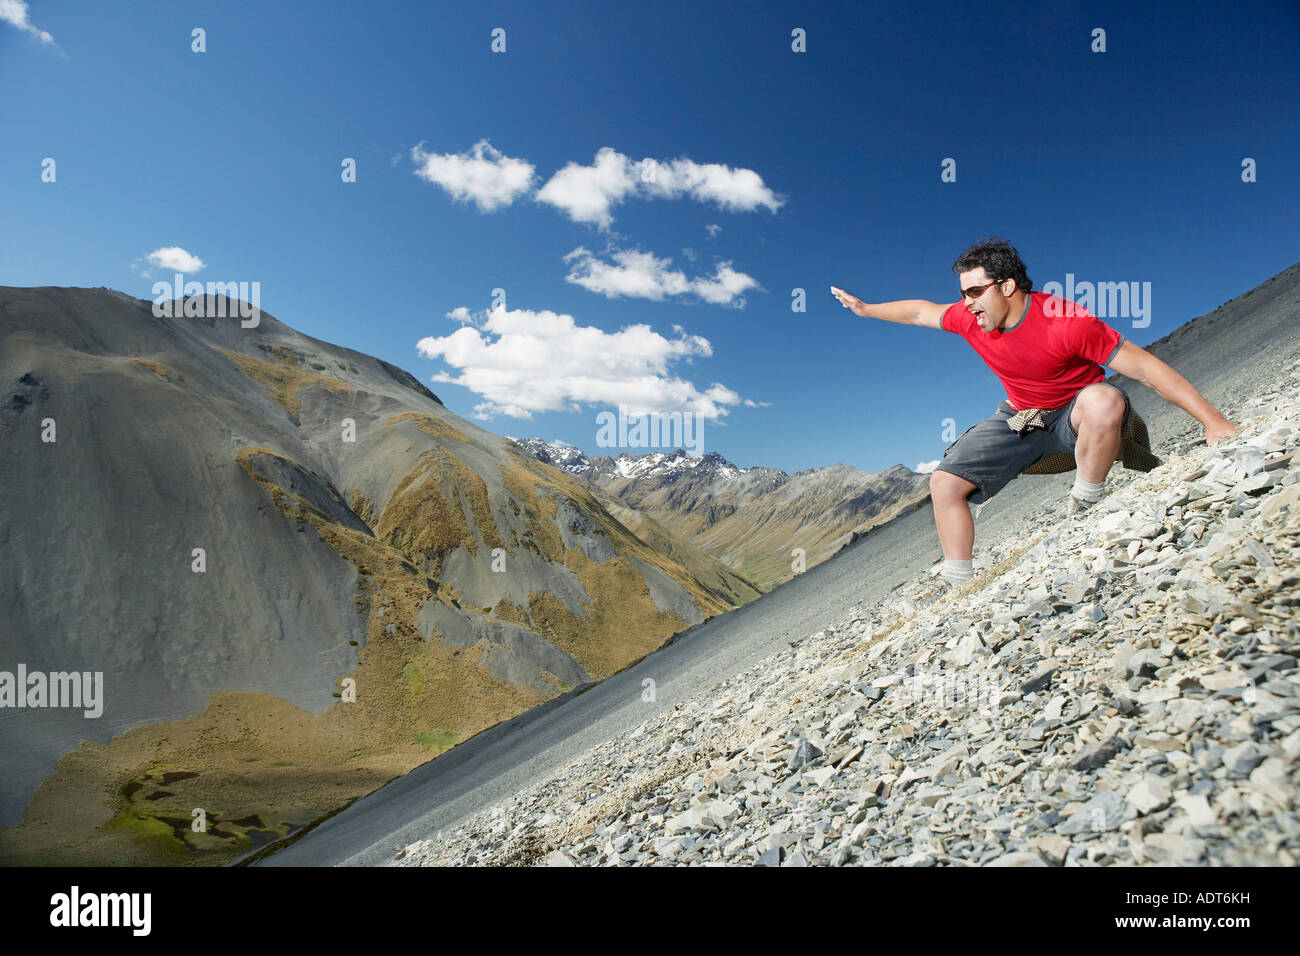 Man sliding down screen field in mountains Stock Photo - Alamy